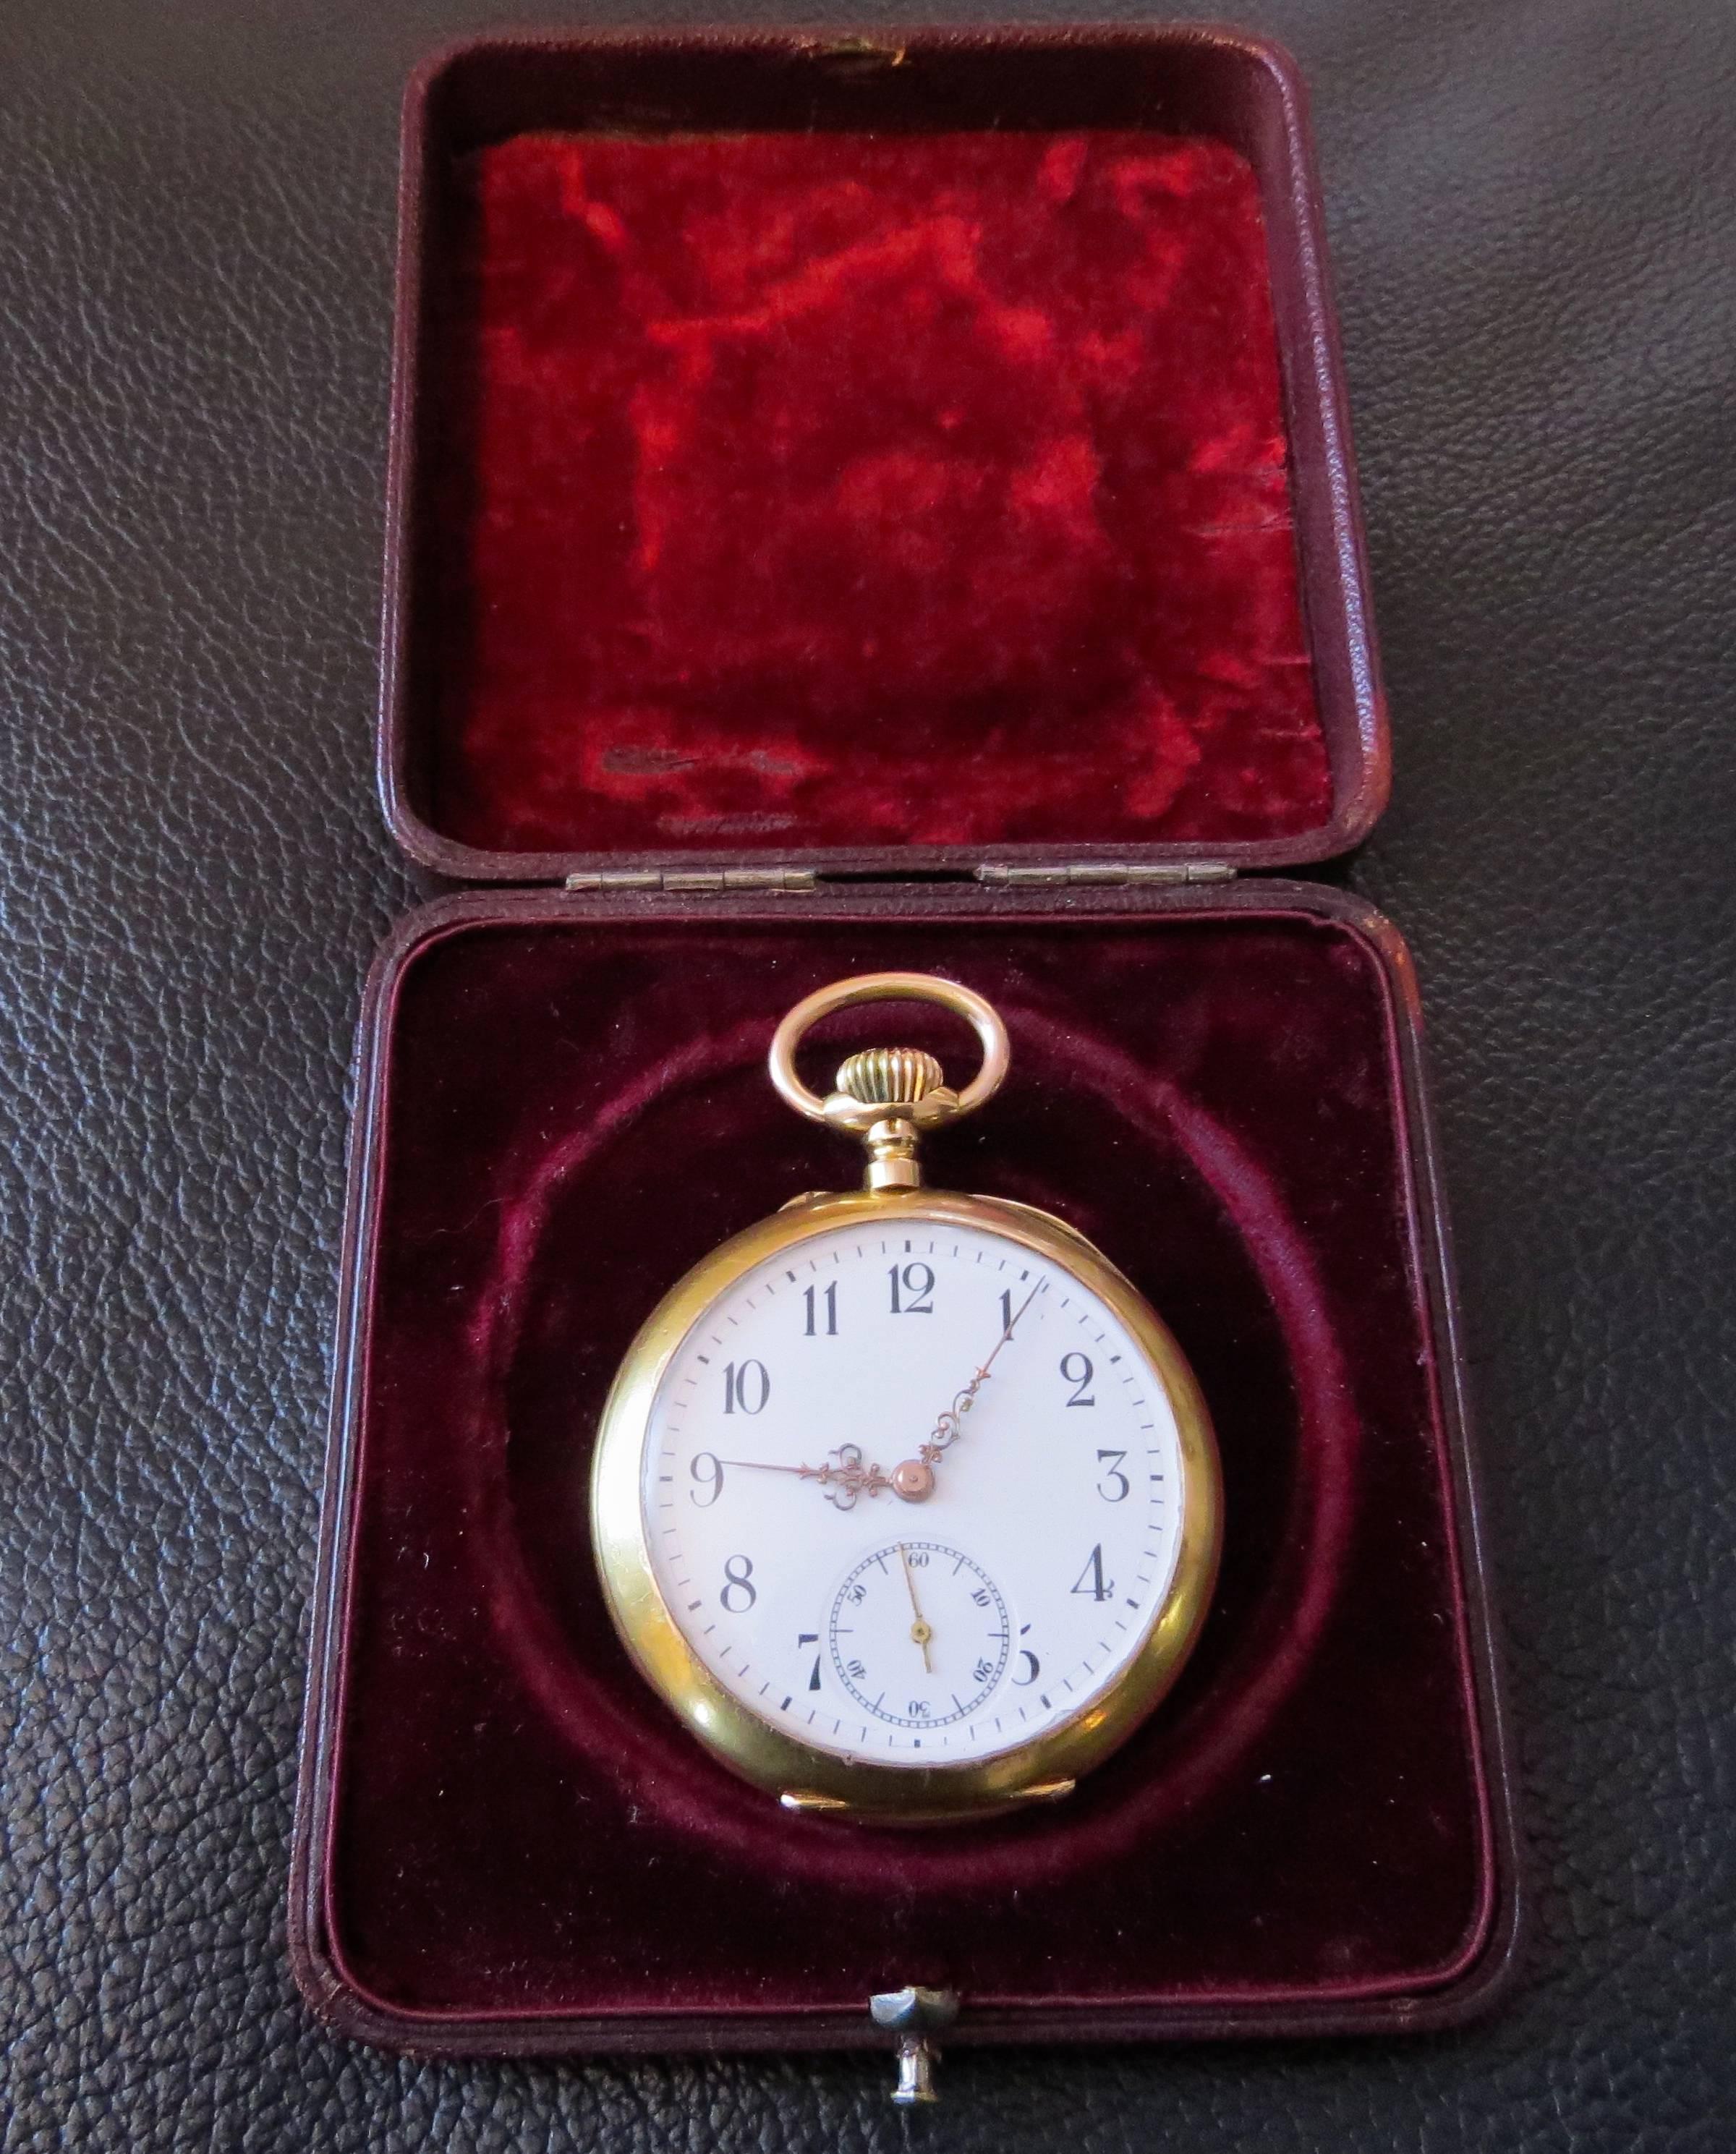 King Victor Emmanuel of Italy Swiss Richard pocket watch. Made by order of King Victor.

Early 20th century fine 18-karat gold and three color enamel keyless watch in original presentation box.

Measures 47mm not including the